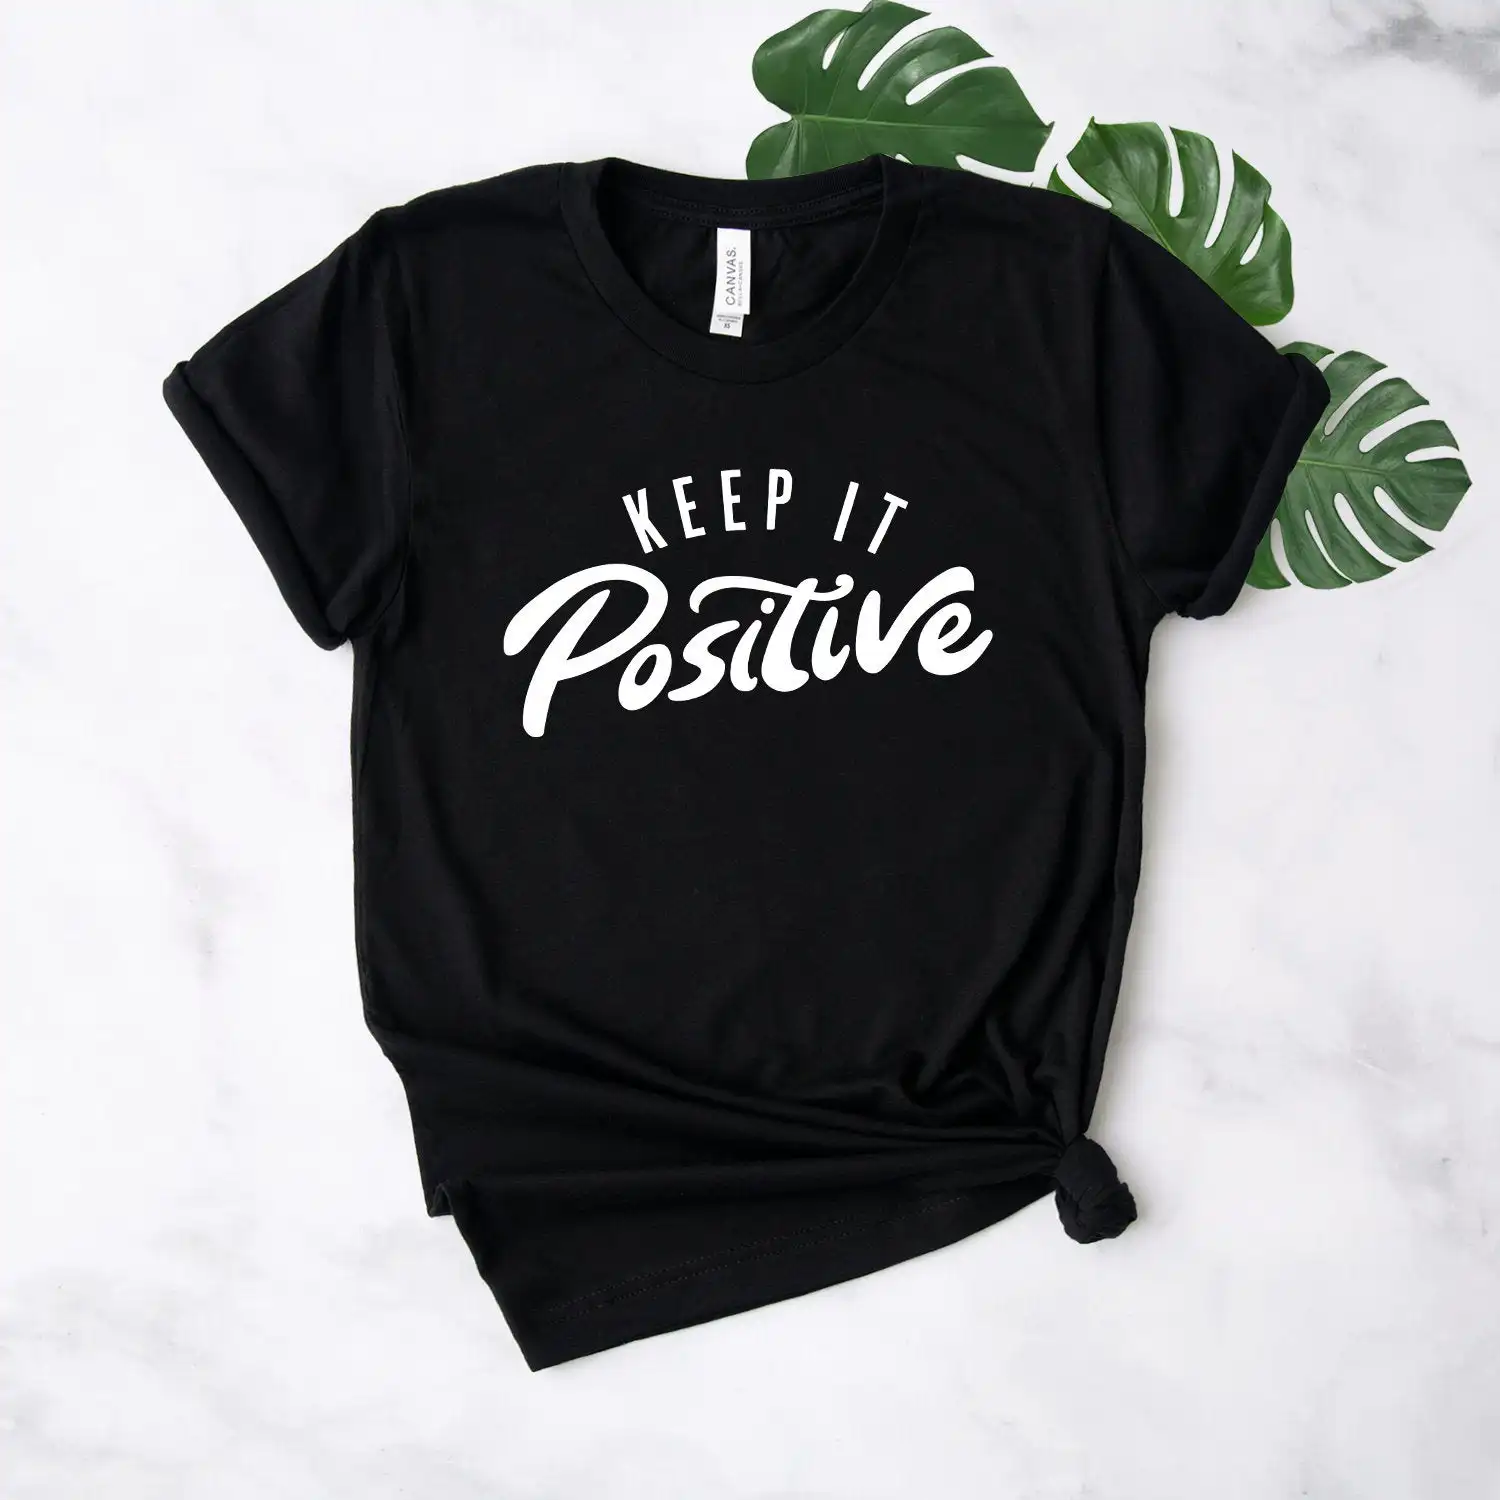 

Keep It Positive Women tshirt Casual Cotton Hipster Funny t-shirt Gift For Lady Yong Girl Top Tee Drop Ship ZY-253